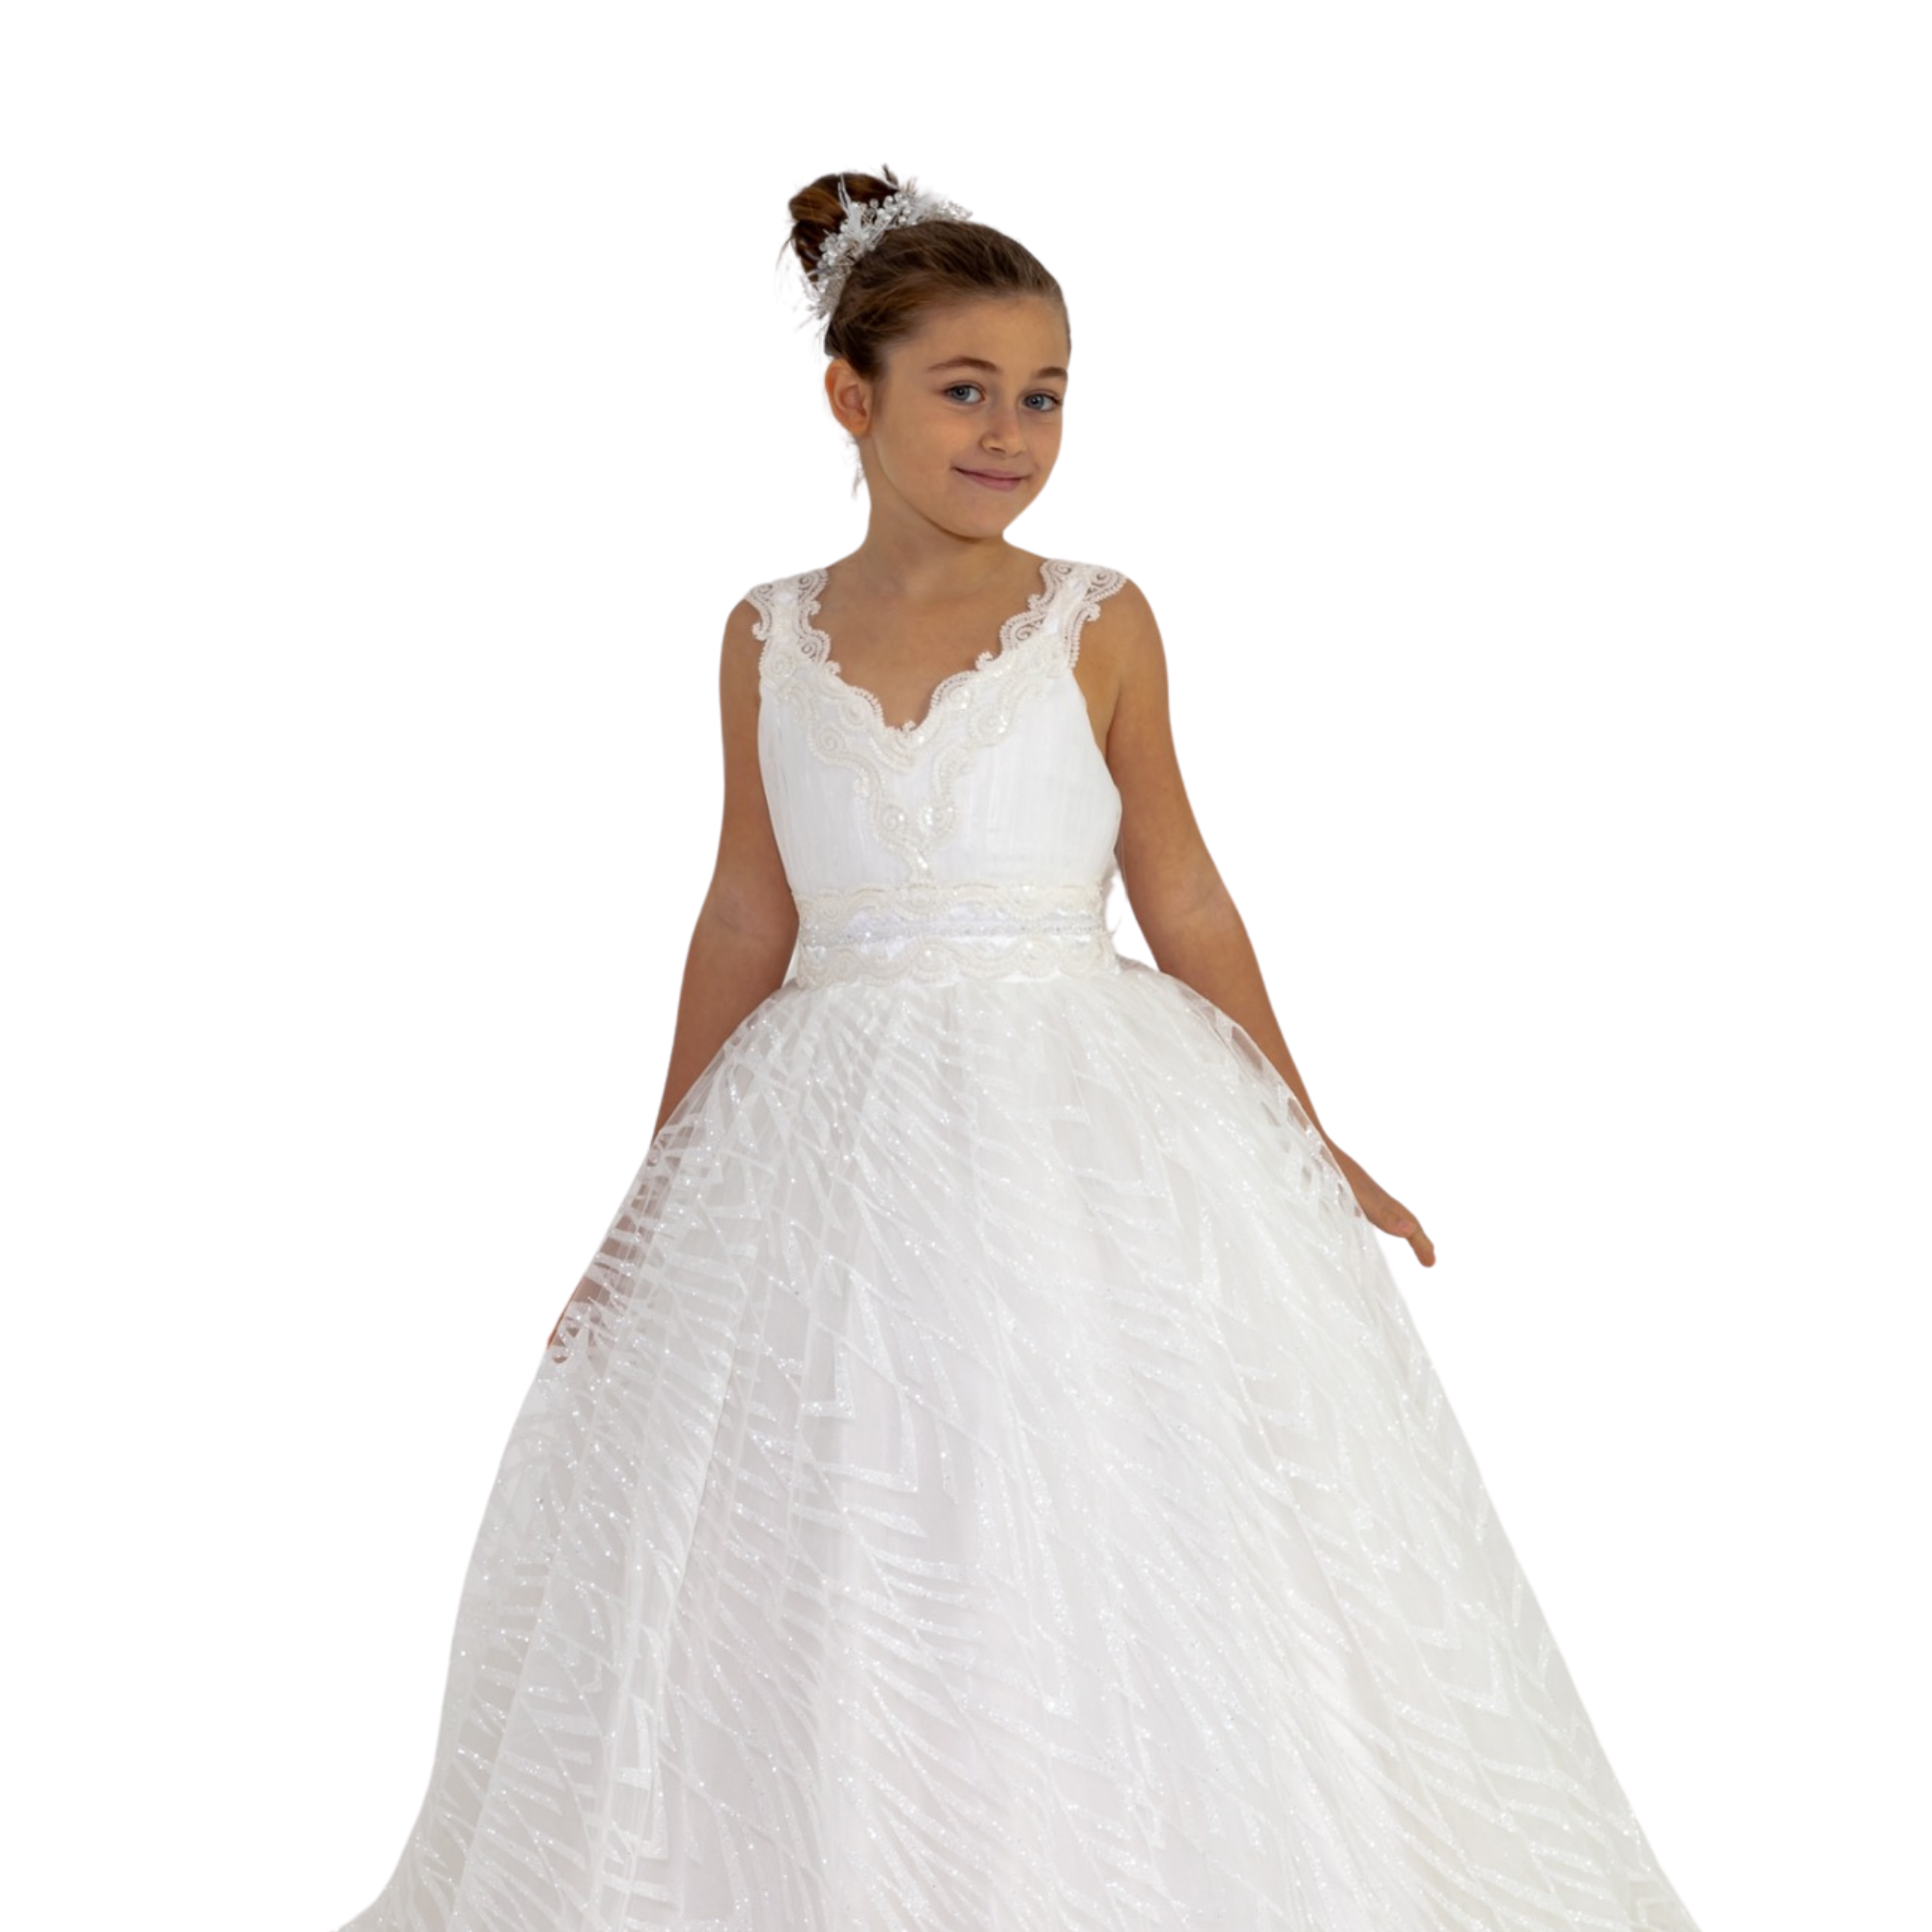 Lina's Gown Girls Formal Dress